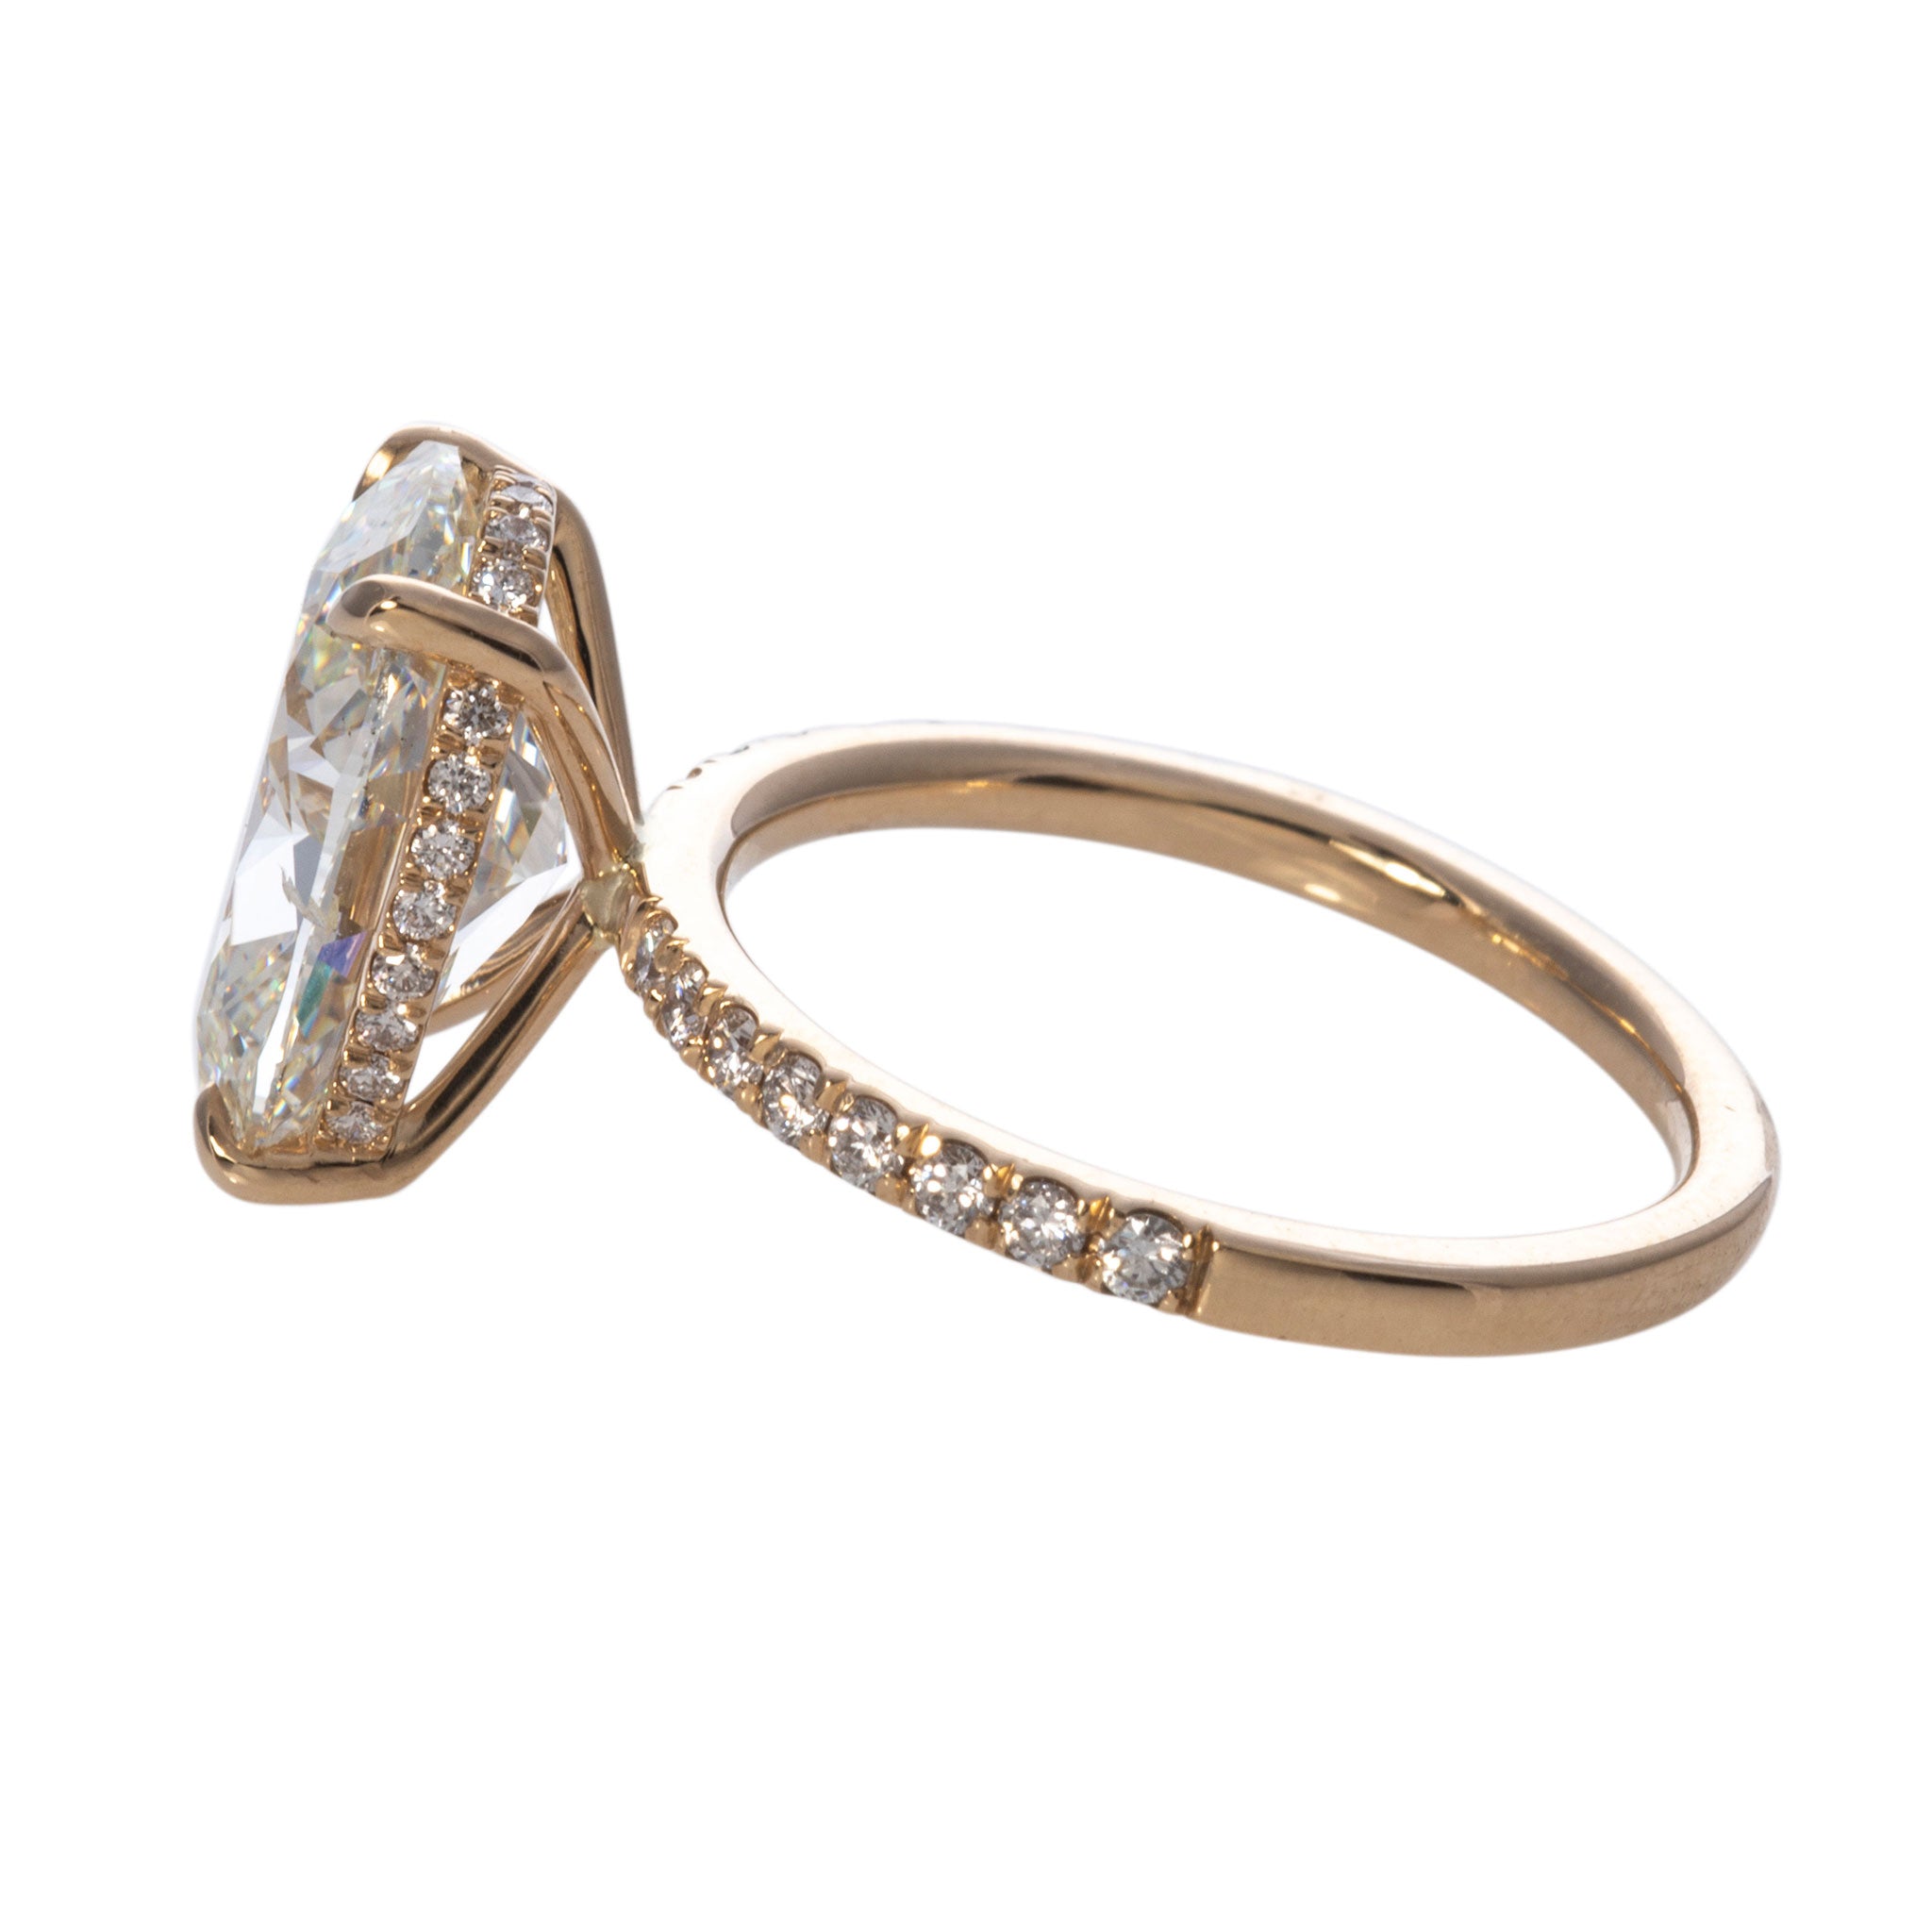 4.75ct Oval Diamond Solitaire Pavé 14K Yellow Gold Engagement Ring